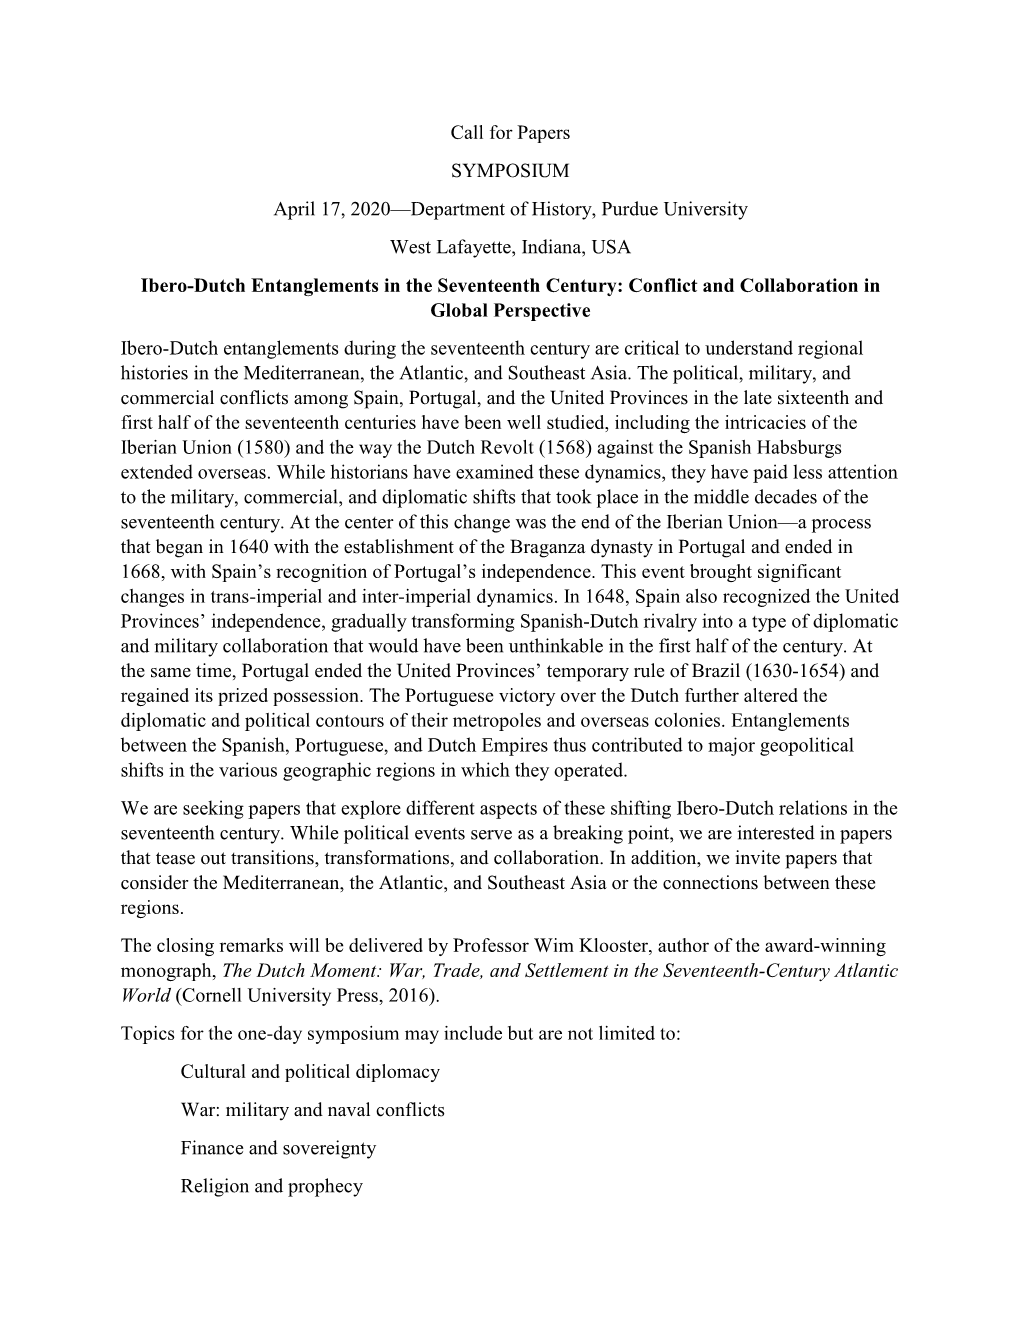 Call for Papers SYMPOSIUM April 17, 2020